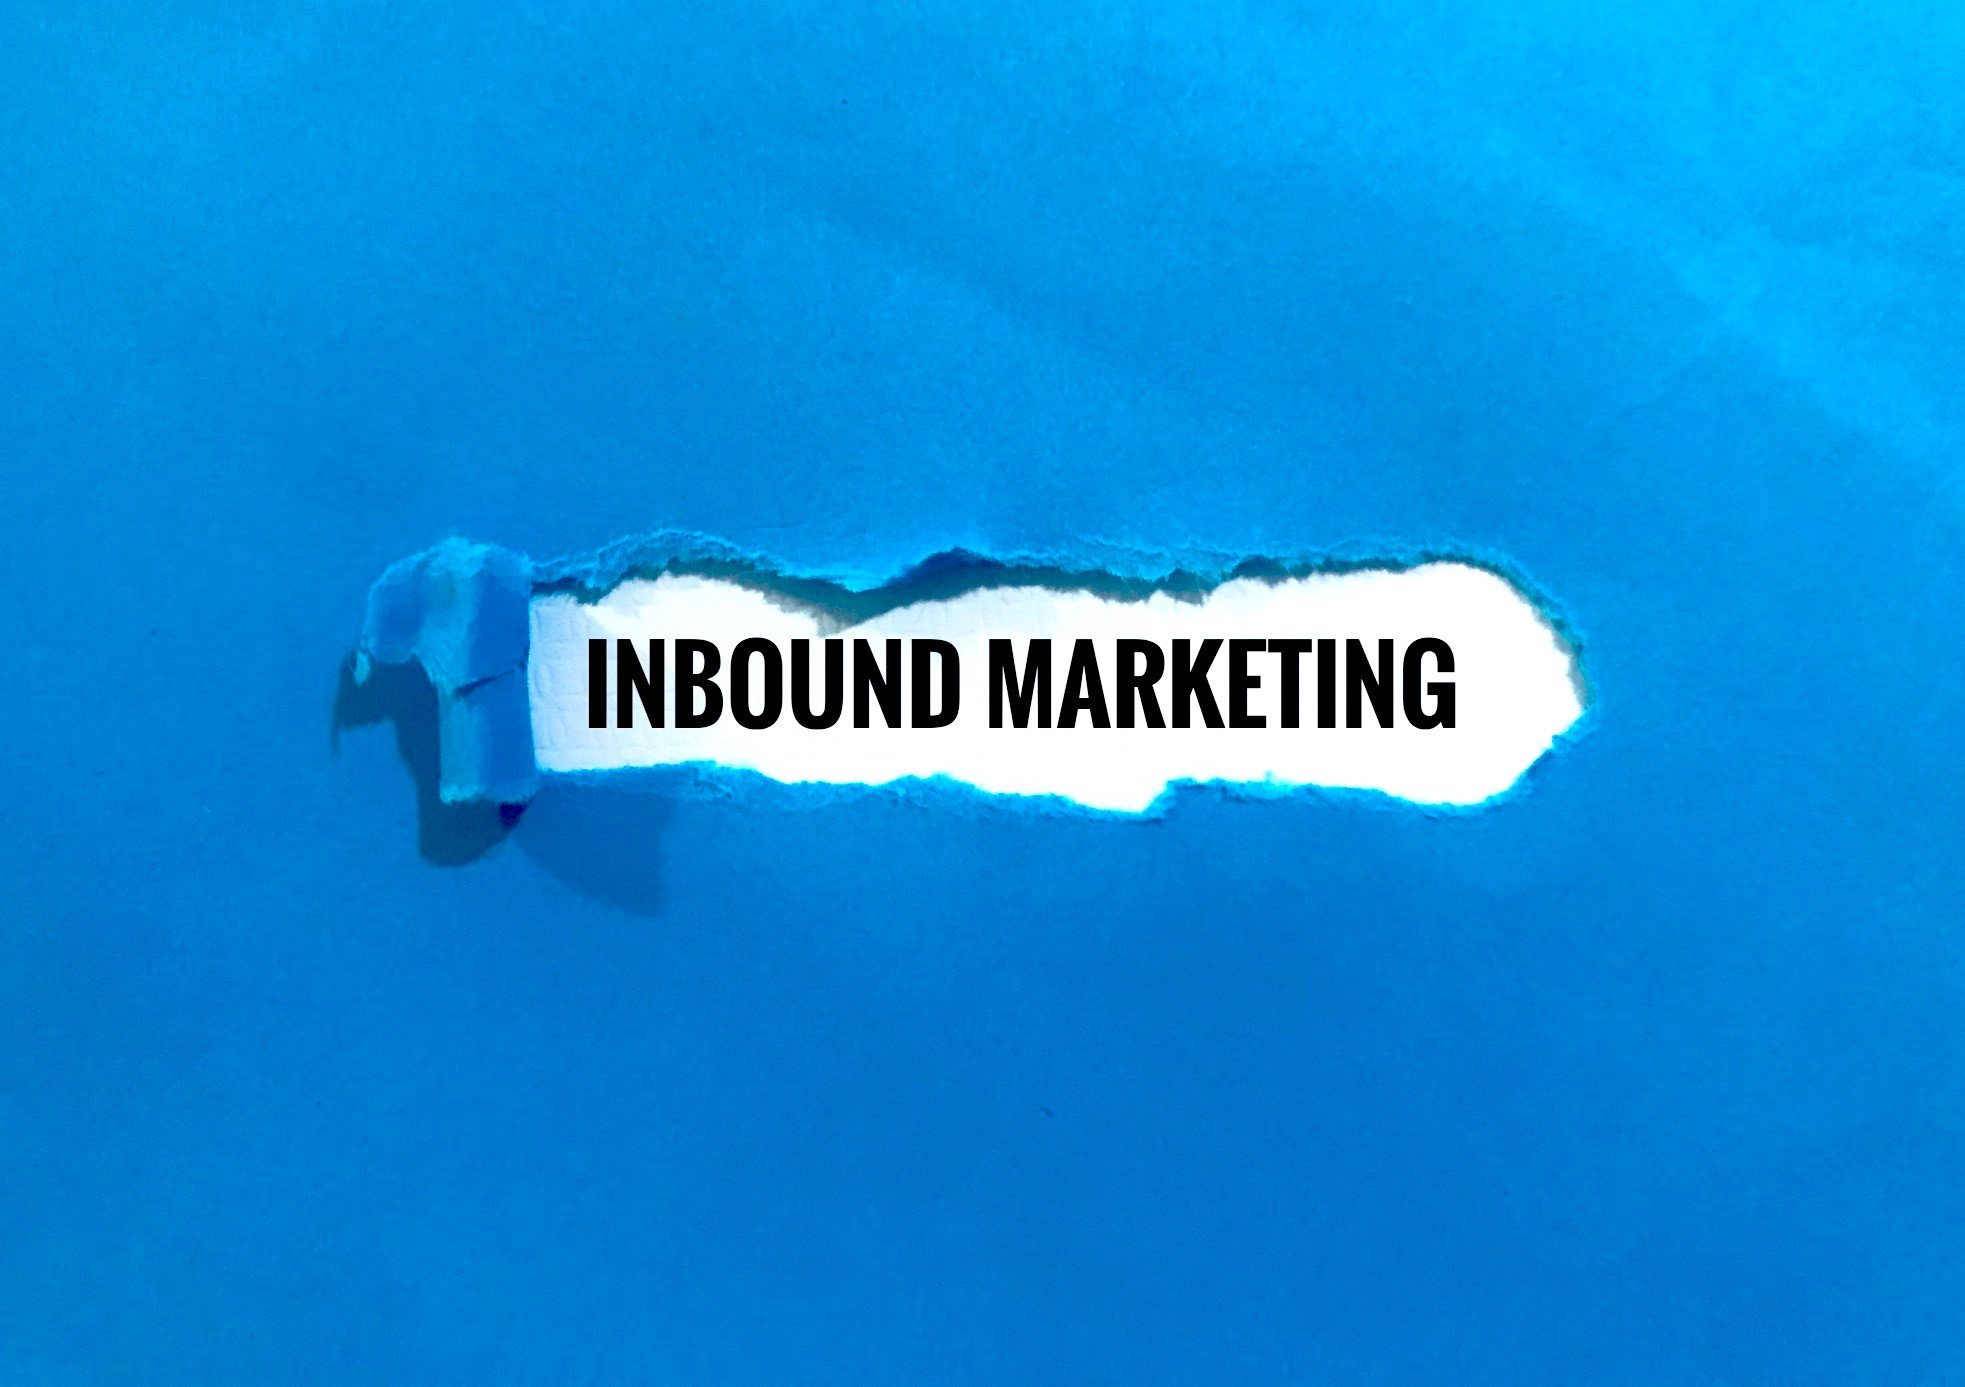 Why is Social Media Marketing an Important Part of inbound marketing?